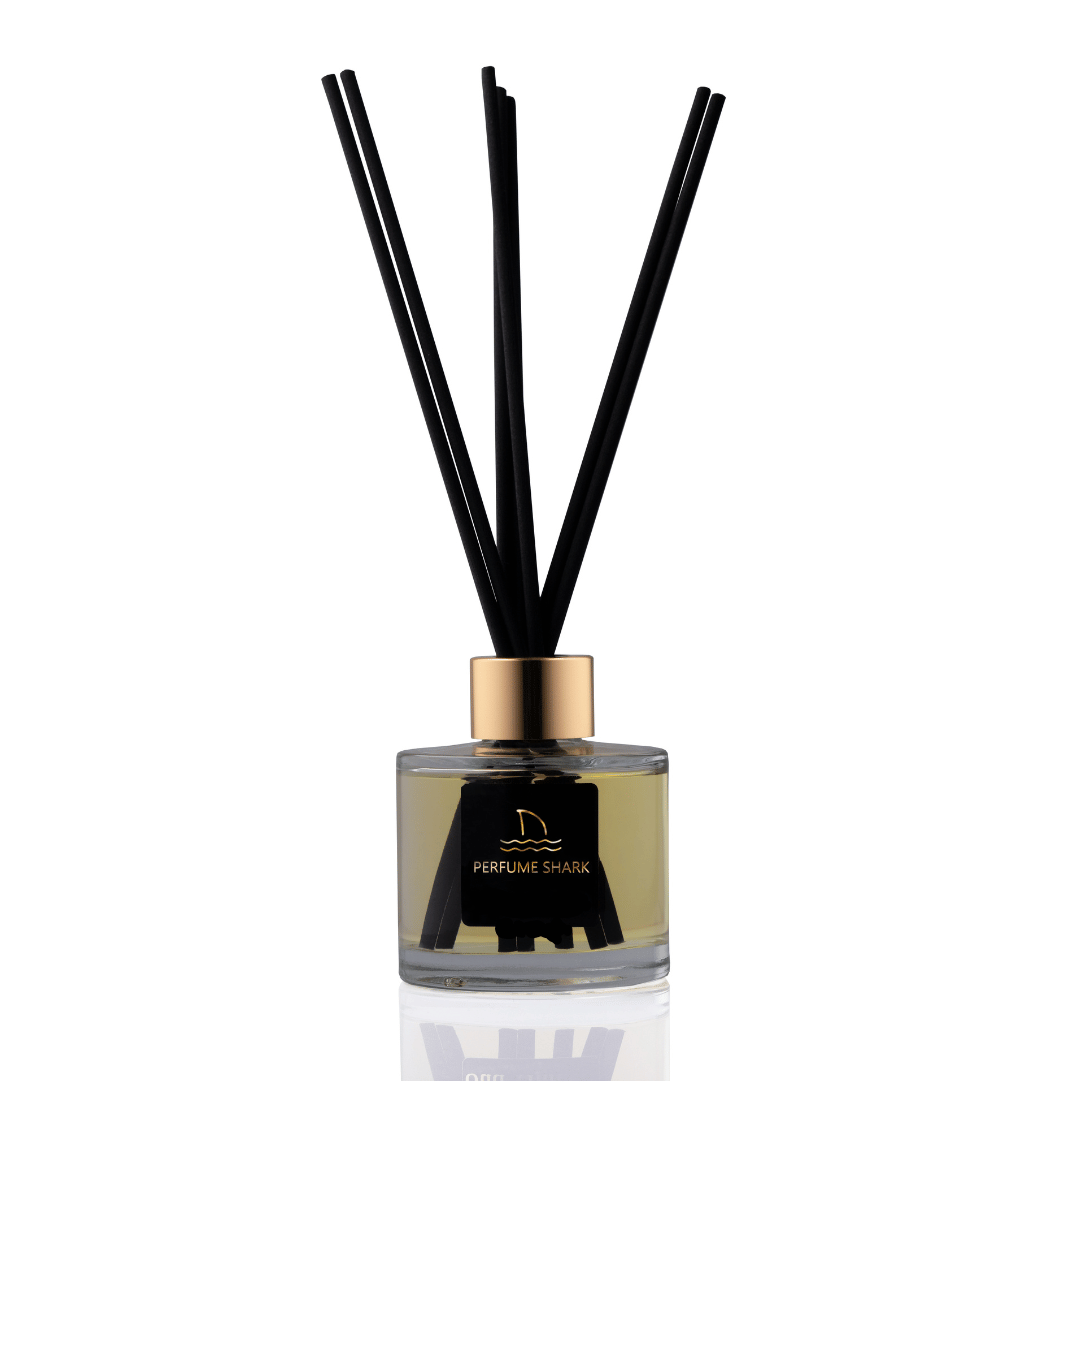 Venom - With Similar Fragrant Notes to Poison By Dior